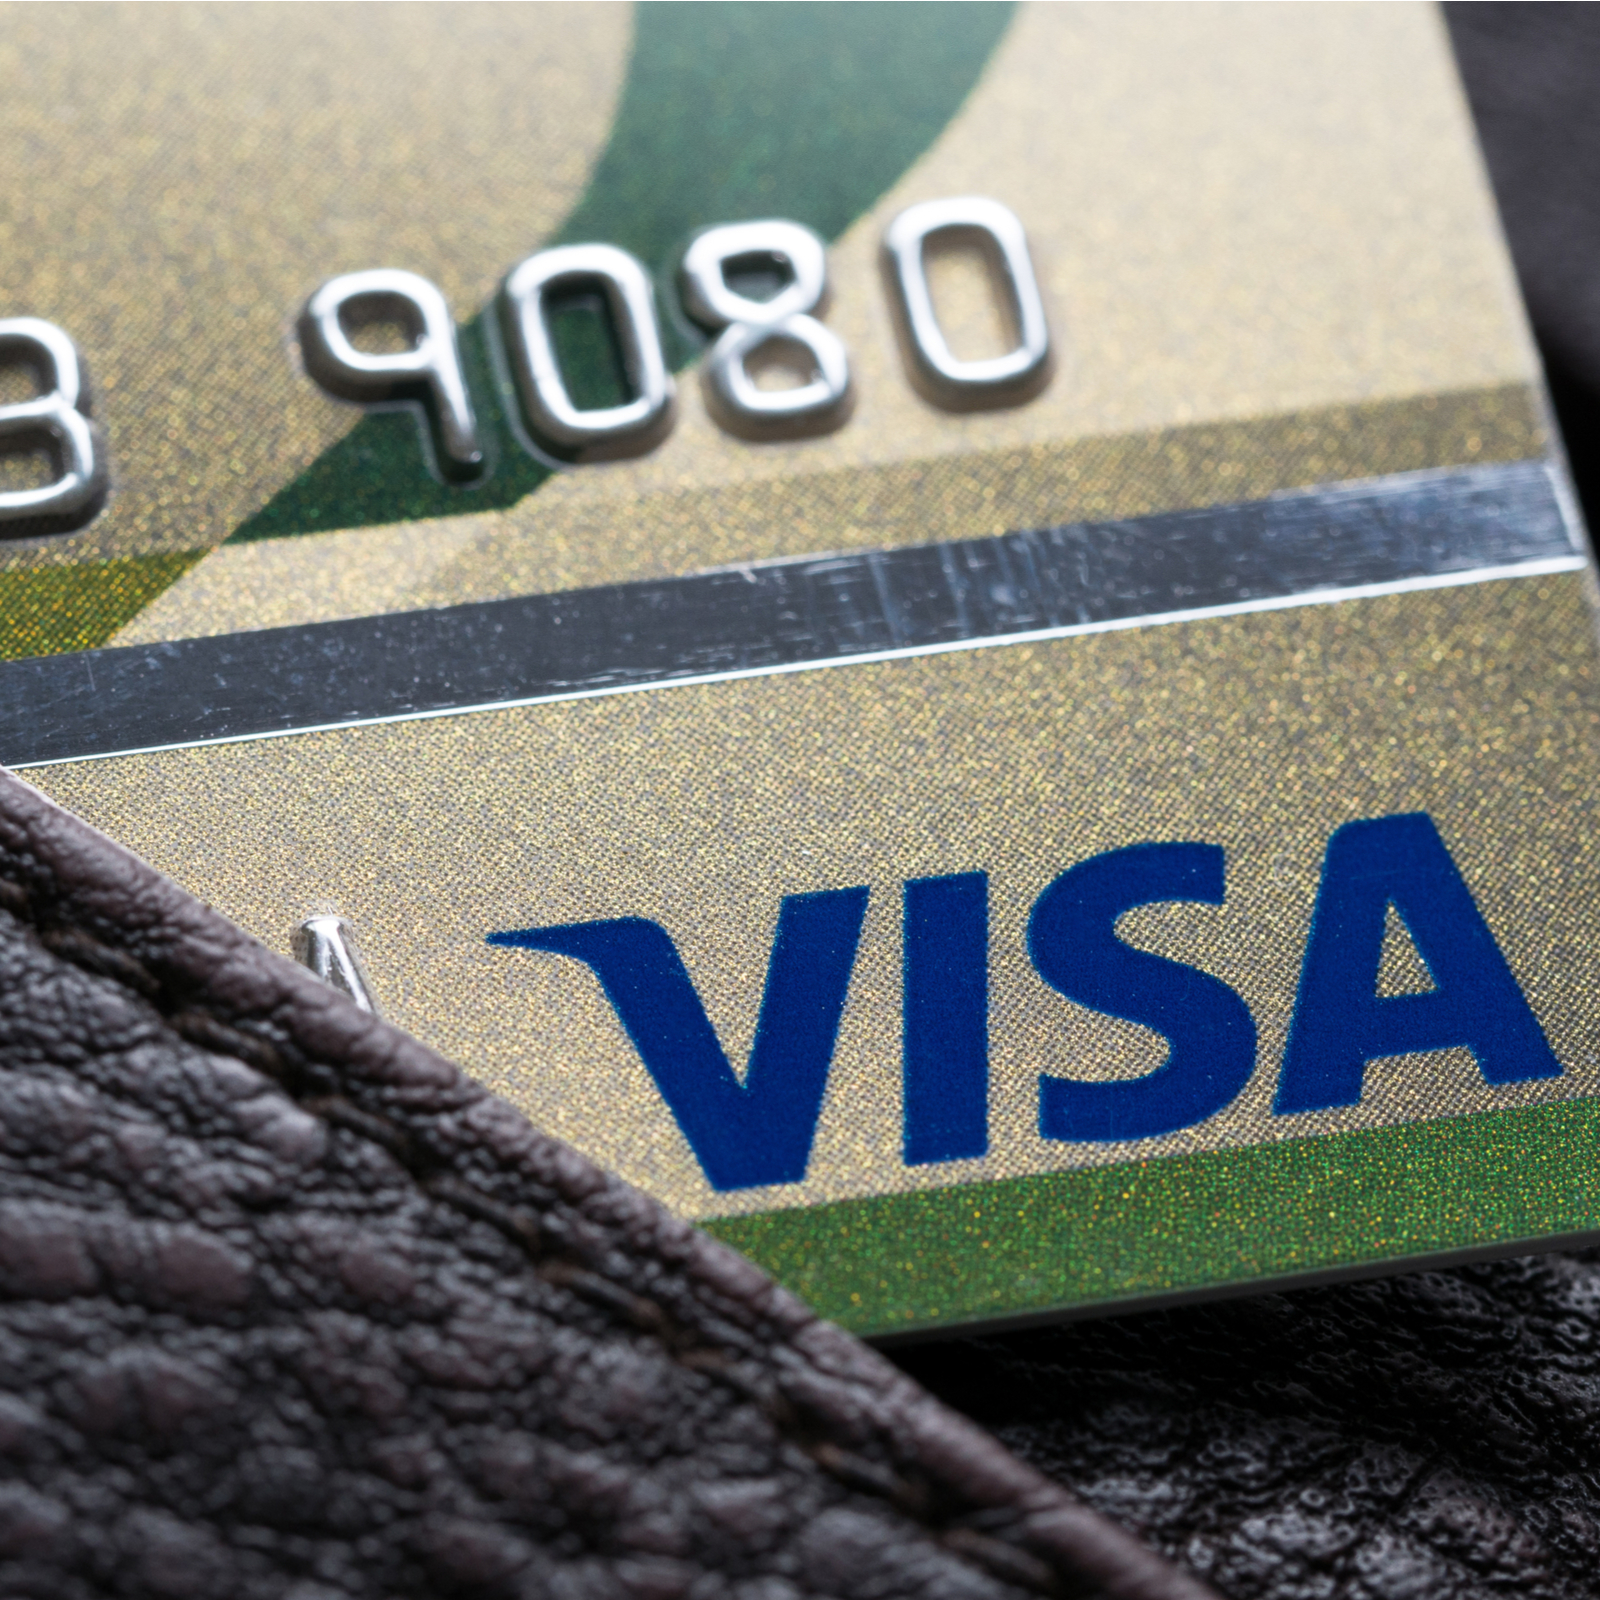 Visa CEO: Bitcoin is Not a Payment System